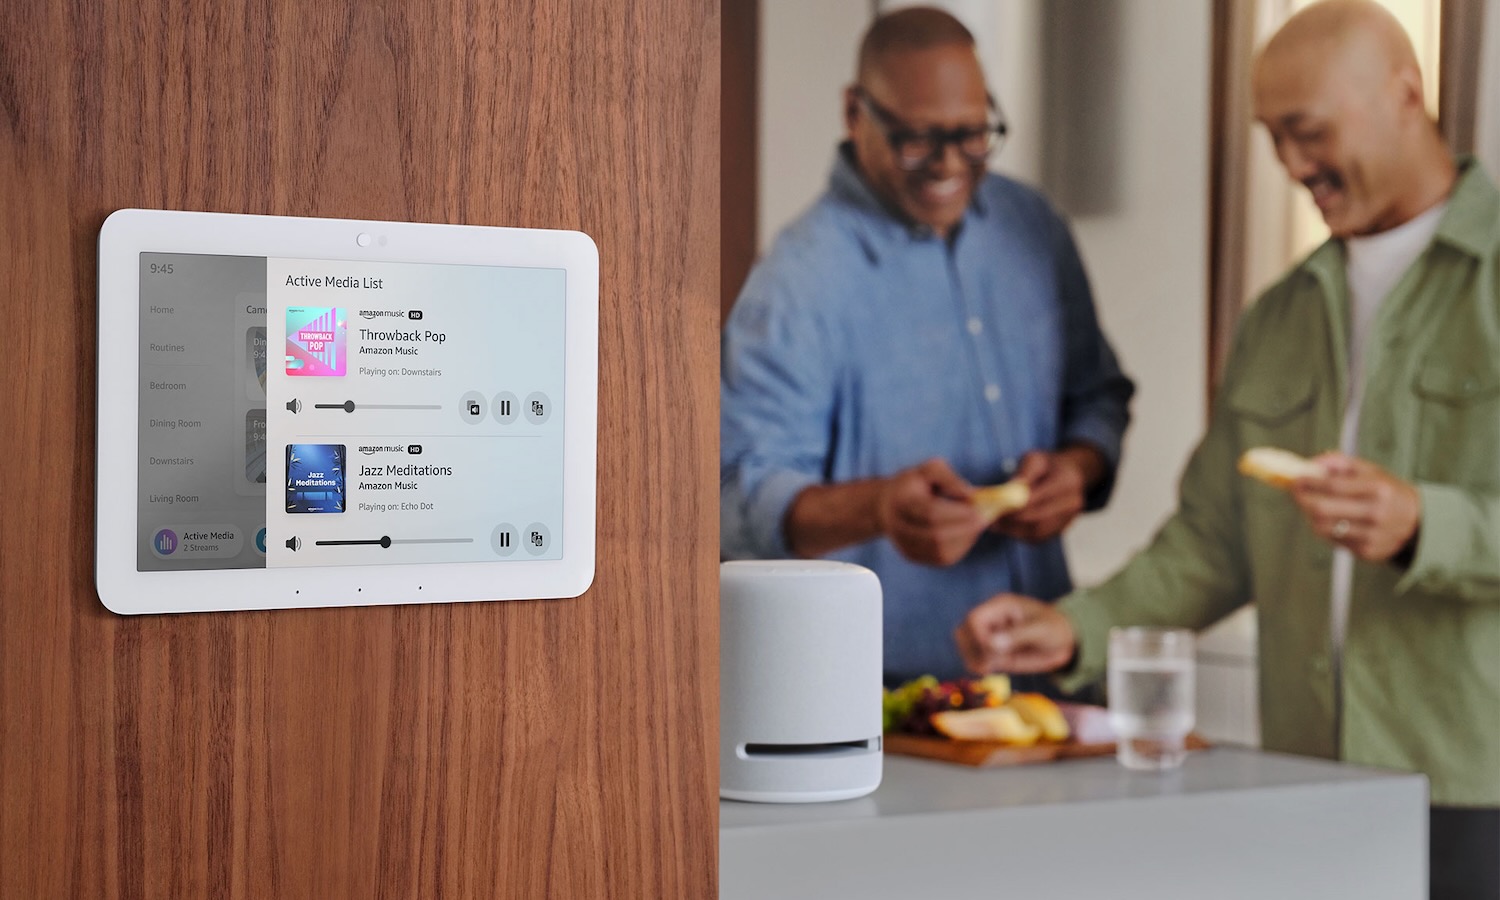 unveils new Echo Hub to take control of all your smart home